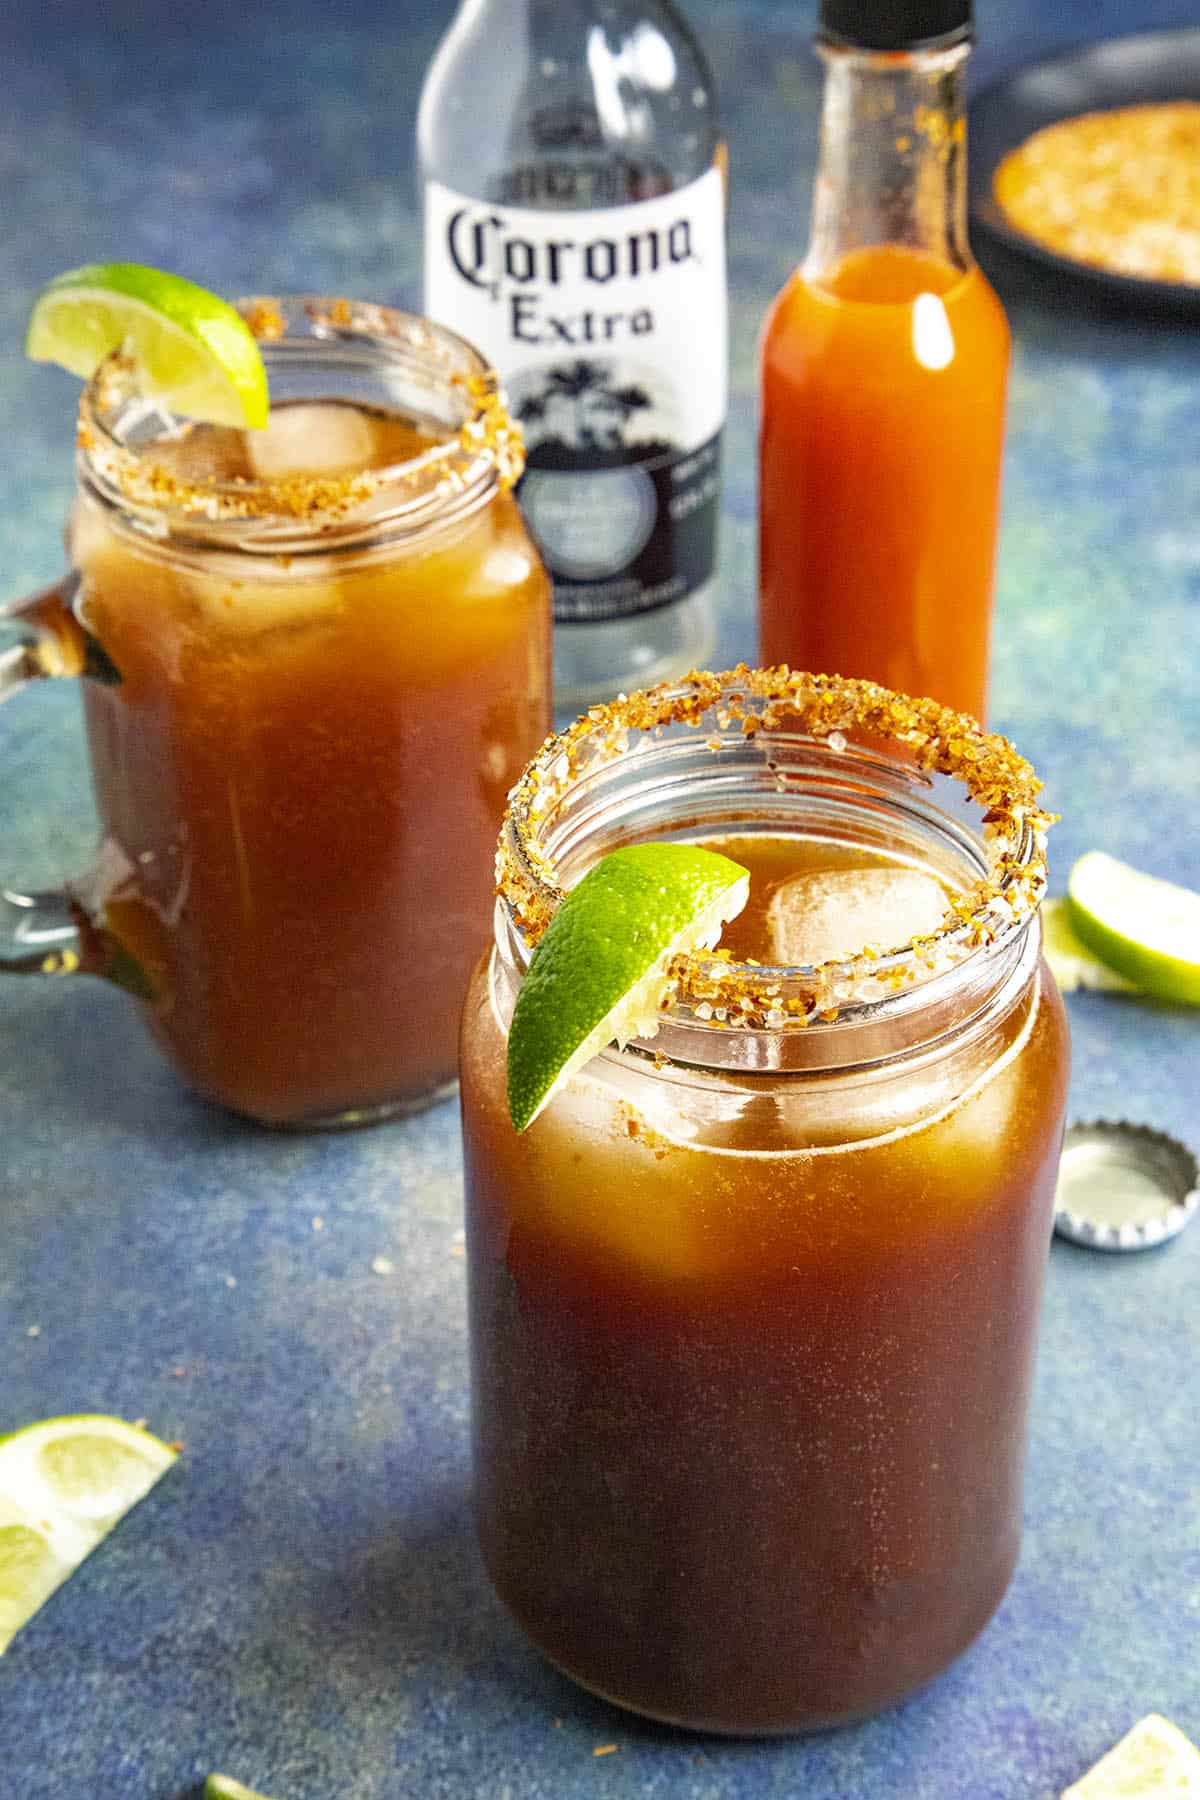 Two micheladas, Mexican beer and Clamato juice cocktails, ready to enjoy